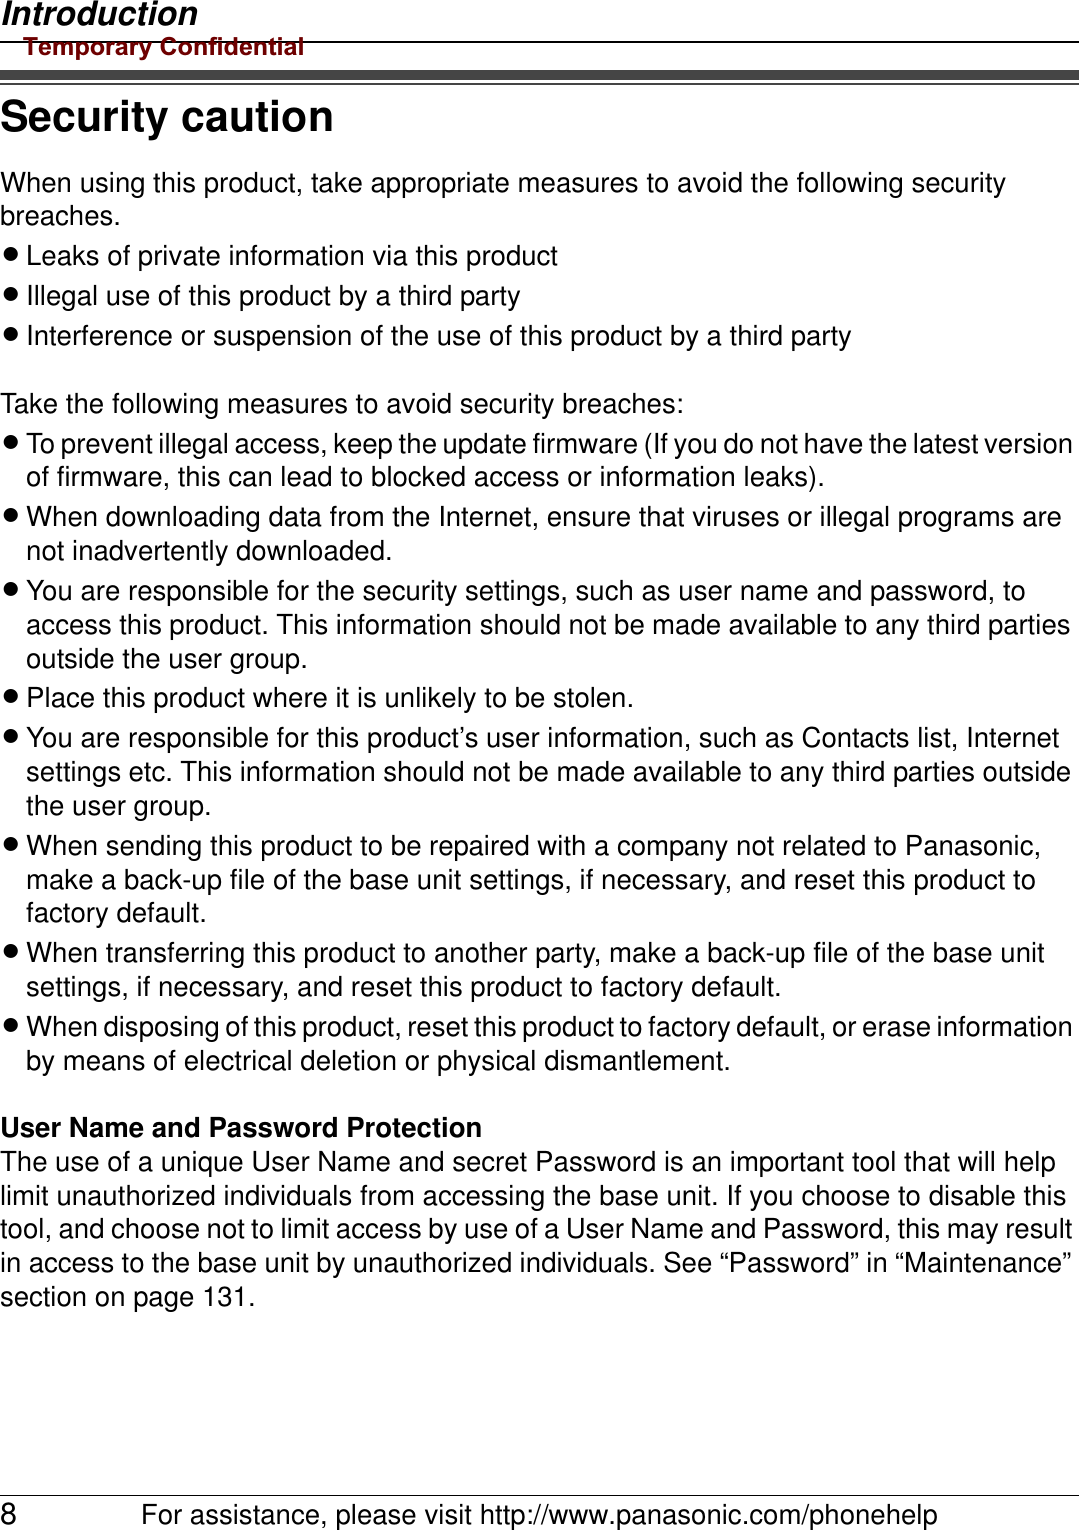 Introduction8For assistance, please visit http://www.panasonic.com/phonehelpSecurity cautionWhen using this product, take appropriate measures to avoid the following security breaches.LLeaks of private information via this productLIllegal use of this product by a third partyLInterference or suspension of the use of this product by a third partyTake the following measures to avoid security breaches:LTo prevent illegal access, keep the update firmware (If you do not have the latest version of firmware, this can lead to blocked access or information leaks).LWhen downloading data from the Internet, ensure that viruses or illegal programs are not inadvertently downloaded.LYou are responsible for the security settings, such as user name and password, to access this product. This information should not be made available to any third parties outside the user group.LPlace this product where it is unlikely to be stolen.LYou are responsible for this product’s user information, such as Contacts list, Internet settings etc. This information should not be made available to any third parties outside the user group.LWhen sending this product to be repaired with a company not related to Panasonic, make a back-up file of the base unit settings, if necessary, and reset this product to factory default.LWhen transferring this product to another party, make a back-up file of the base unit settings, if necessary, and reset this product to factory default.LWhen disposing of this product, reset this product to factory default, or erase information by means of electrical deletion or physical dismantlement.User Name and Password ProtectionThe use of a unique User Name and secret Password is an important tool that will help limit unauthorized individuals from accessing the base unit. If you choose to disable this tool, and choose not to limit access by use of a User Name and Password, this may result in access to the base unit by unauthorized individuals. See “Password” in “Maintenance” section on page 131.Temporary Confidential